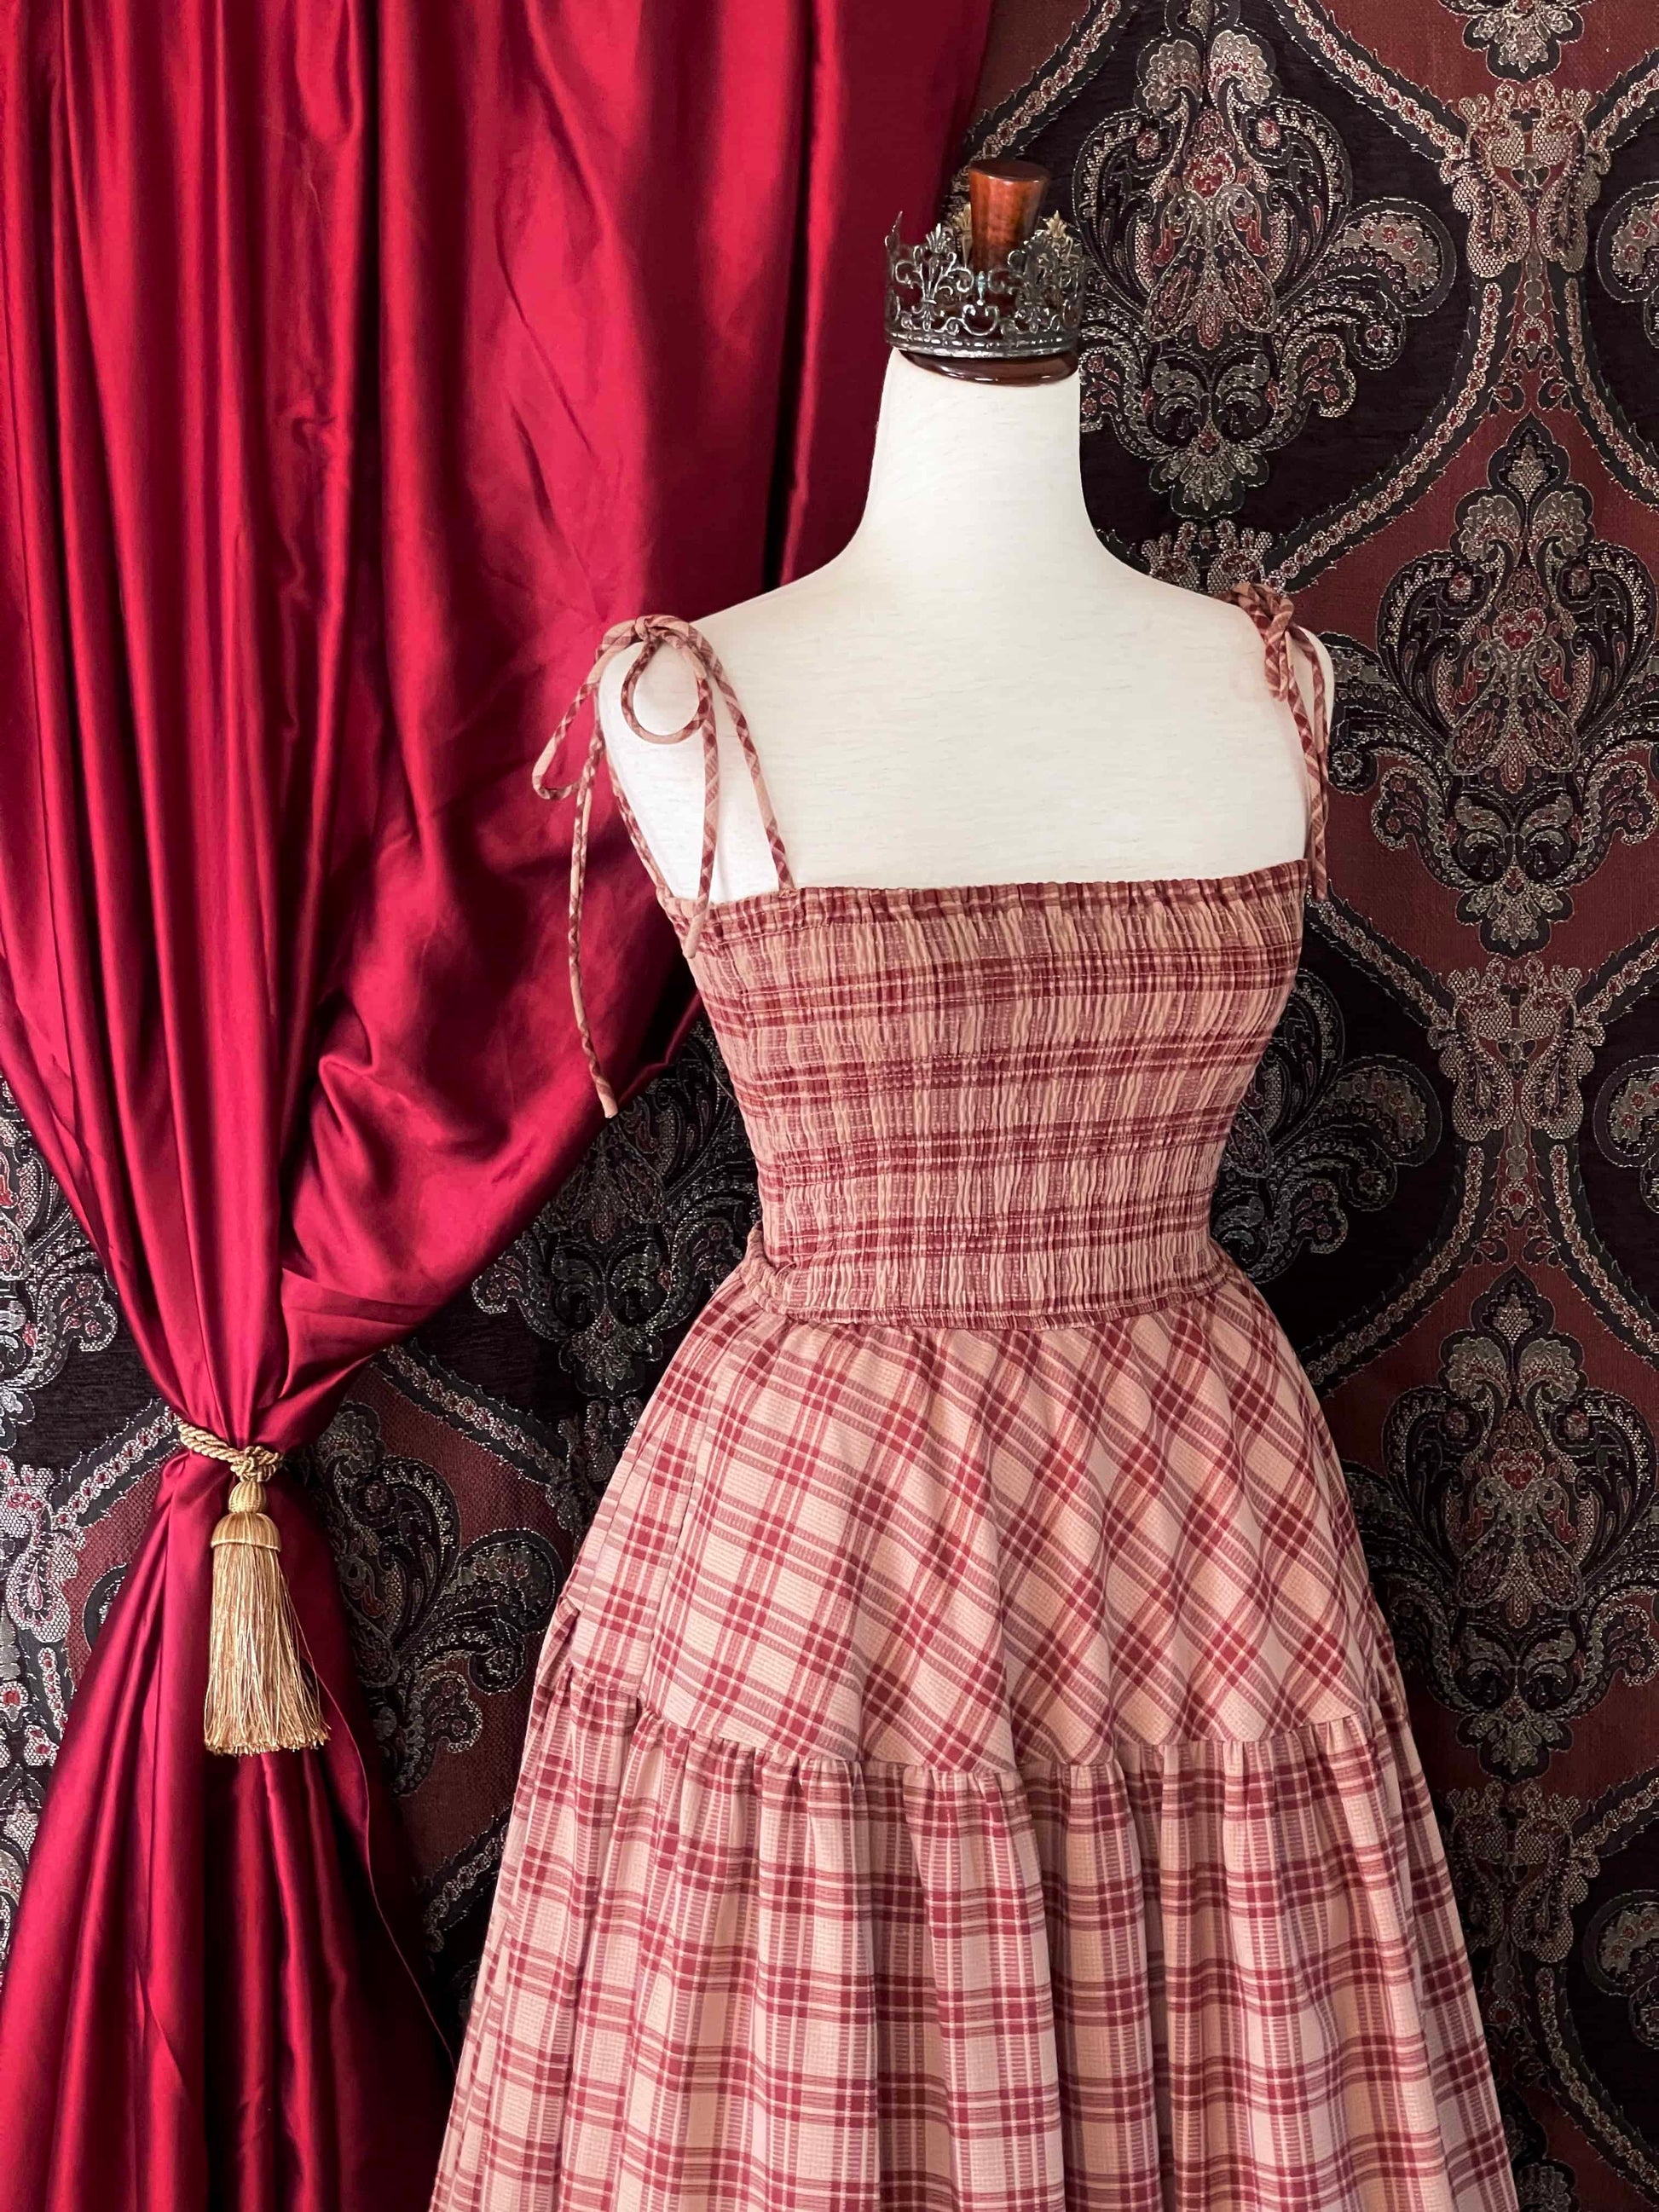 An early medieval era, Anglo Saxon, historically inspired rust and burgundy tartan plaid smocked maxi dress with tiered skirt pictured on a mannequin.